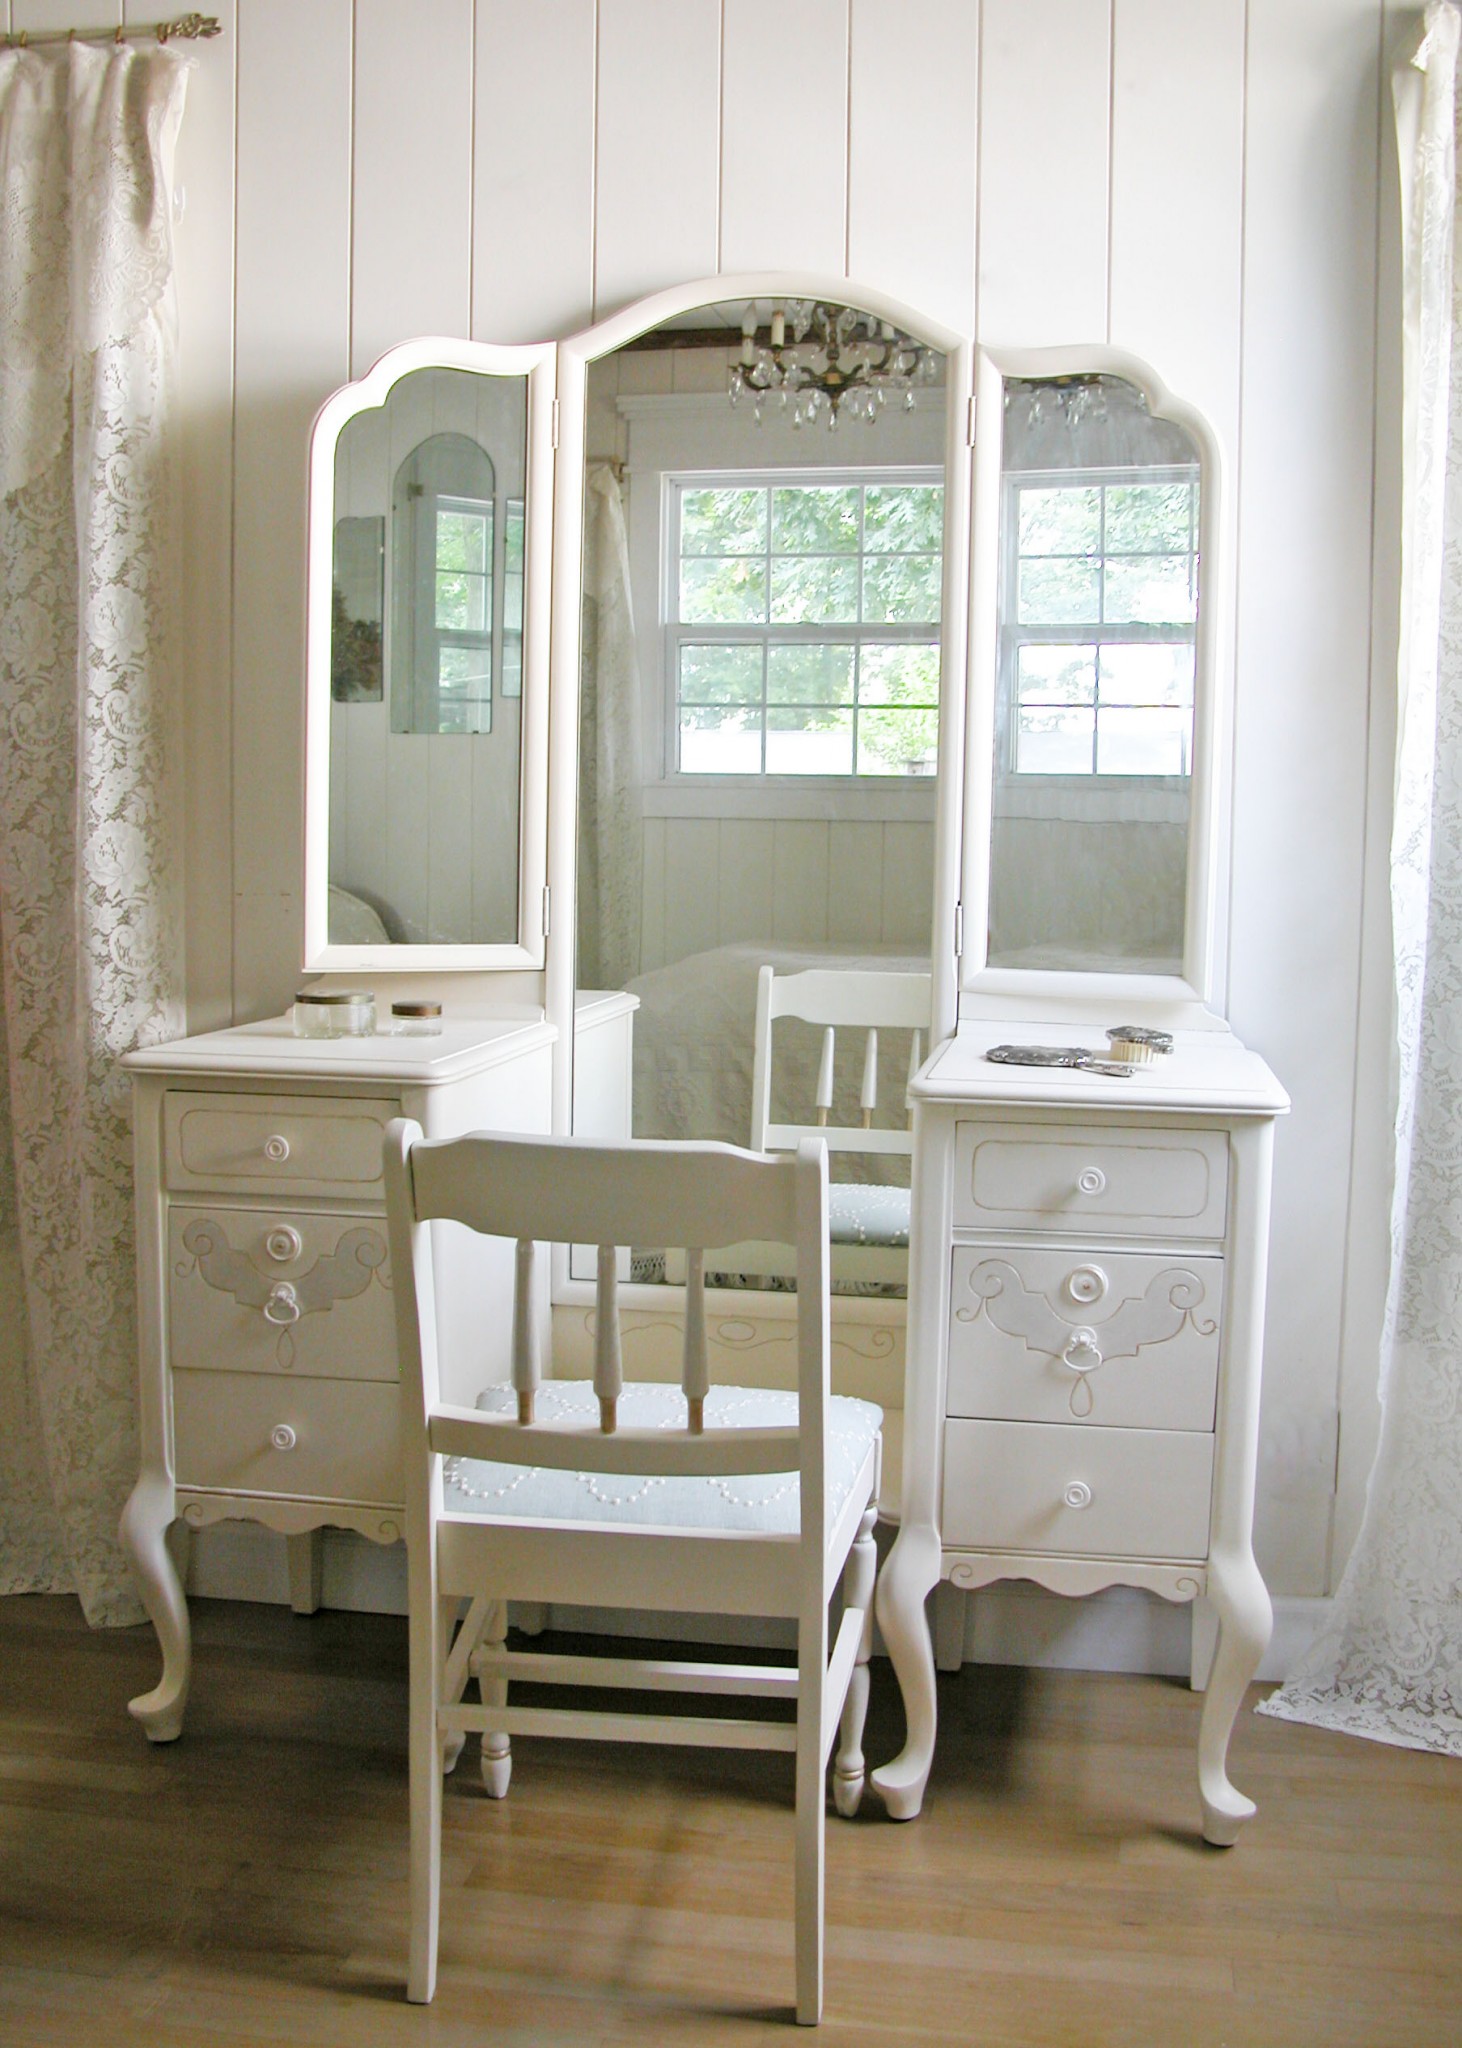 Trifold Dressing Table Refinished as Custom Furniture by Prodigal Pieces | www.prodigalpieces.com